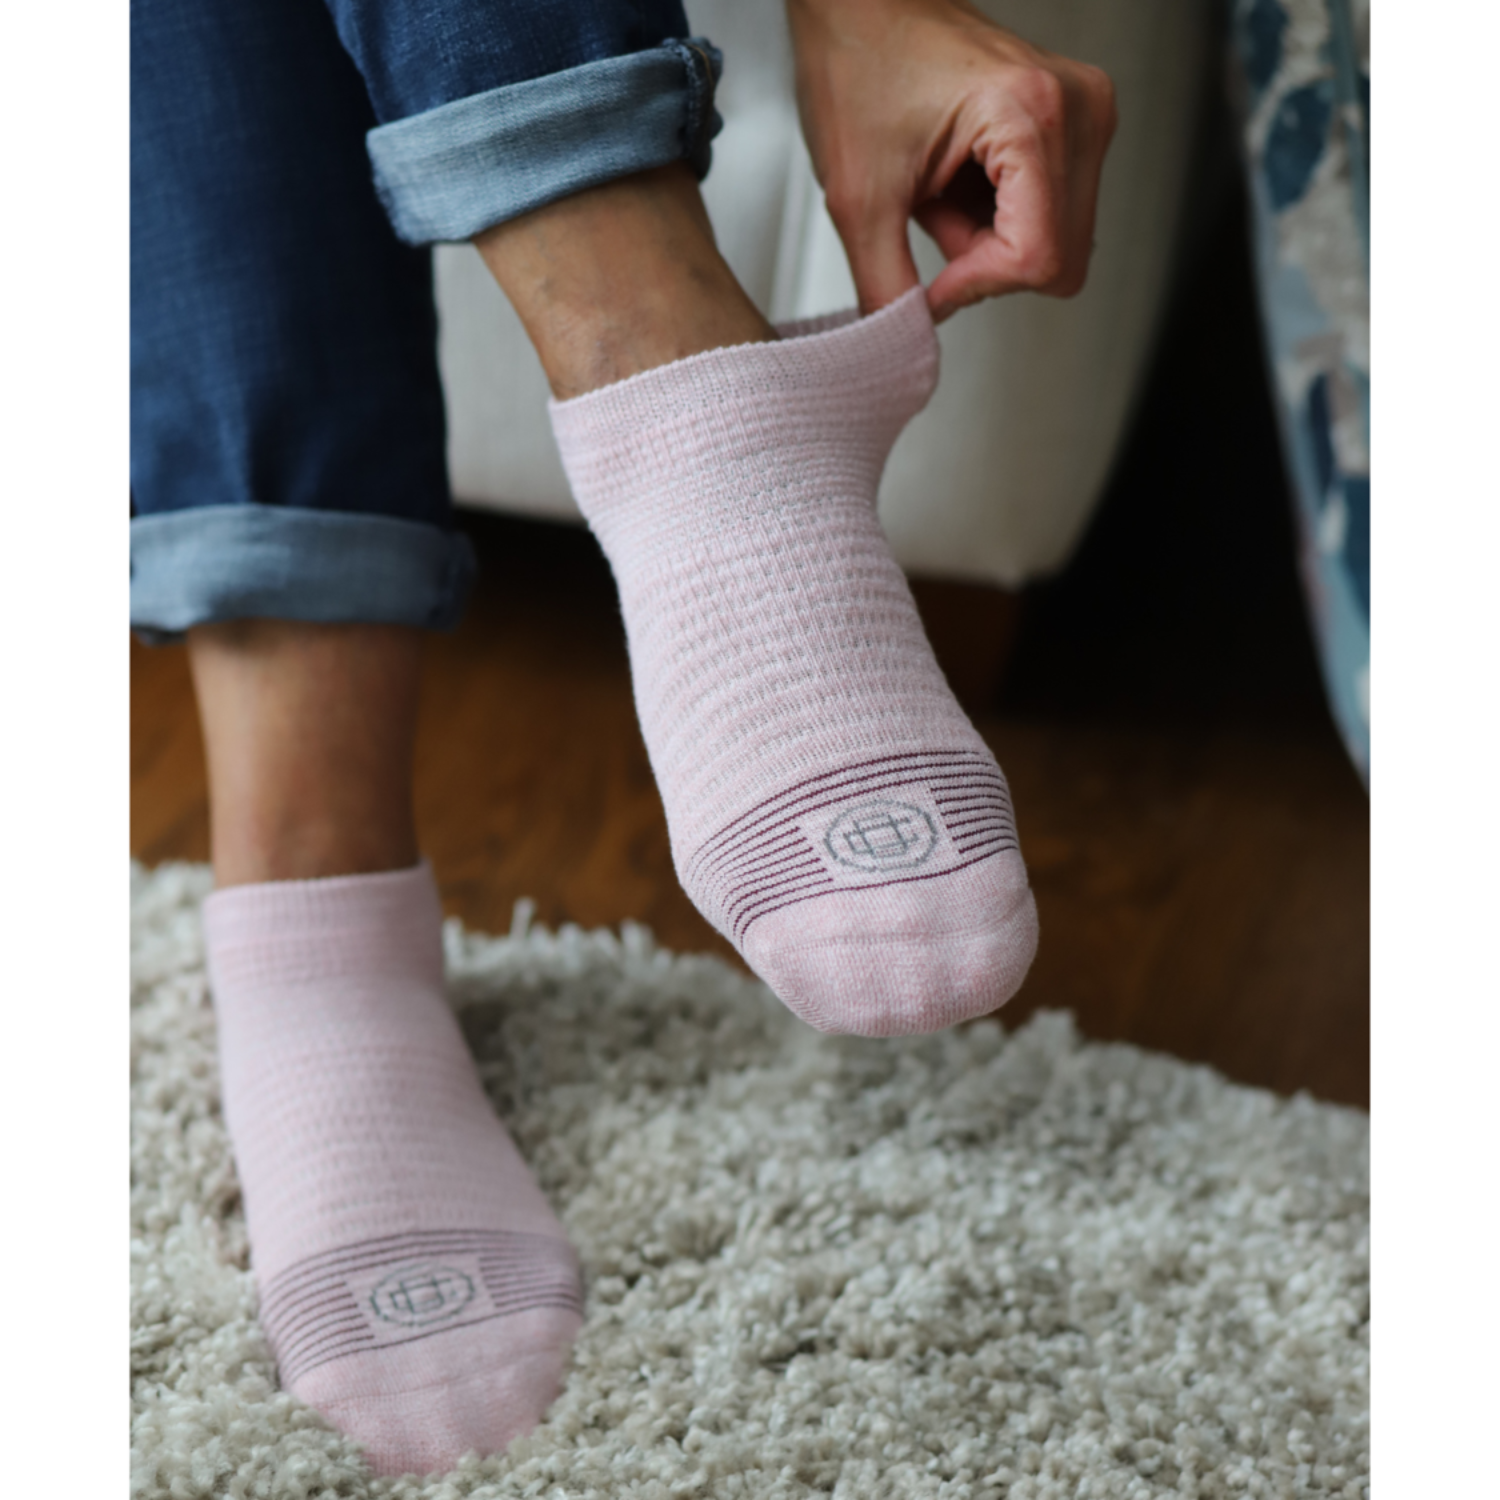 Doctors choice diabetic no-show socks in pink on a foot